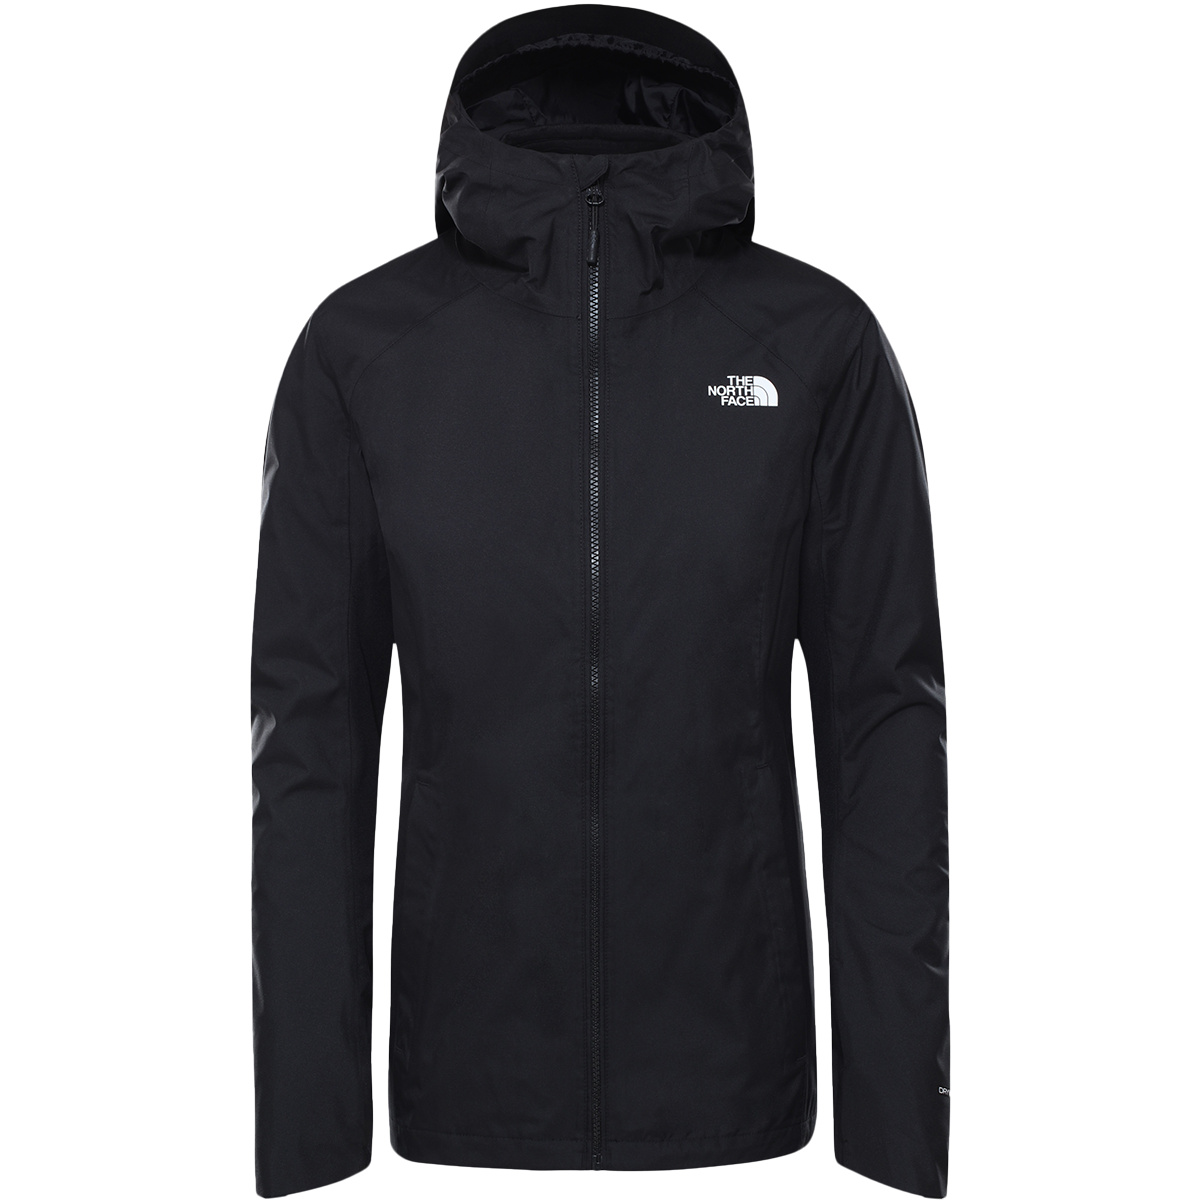 The North Face Damen Quest Triclimate Jacke von The North Face